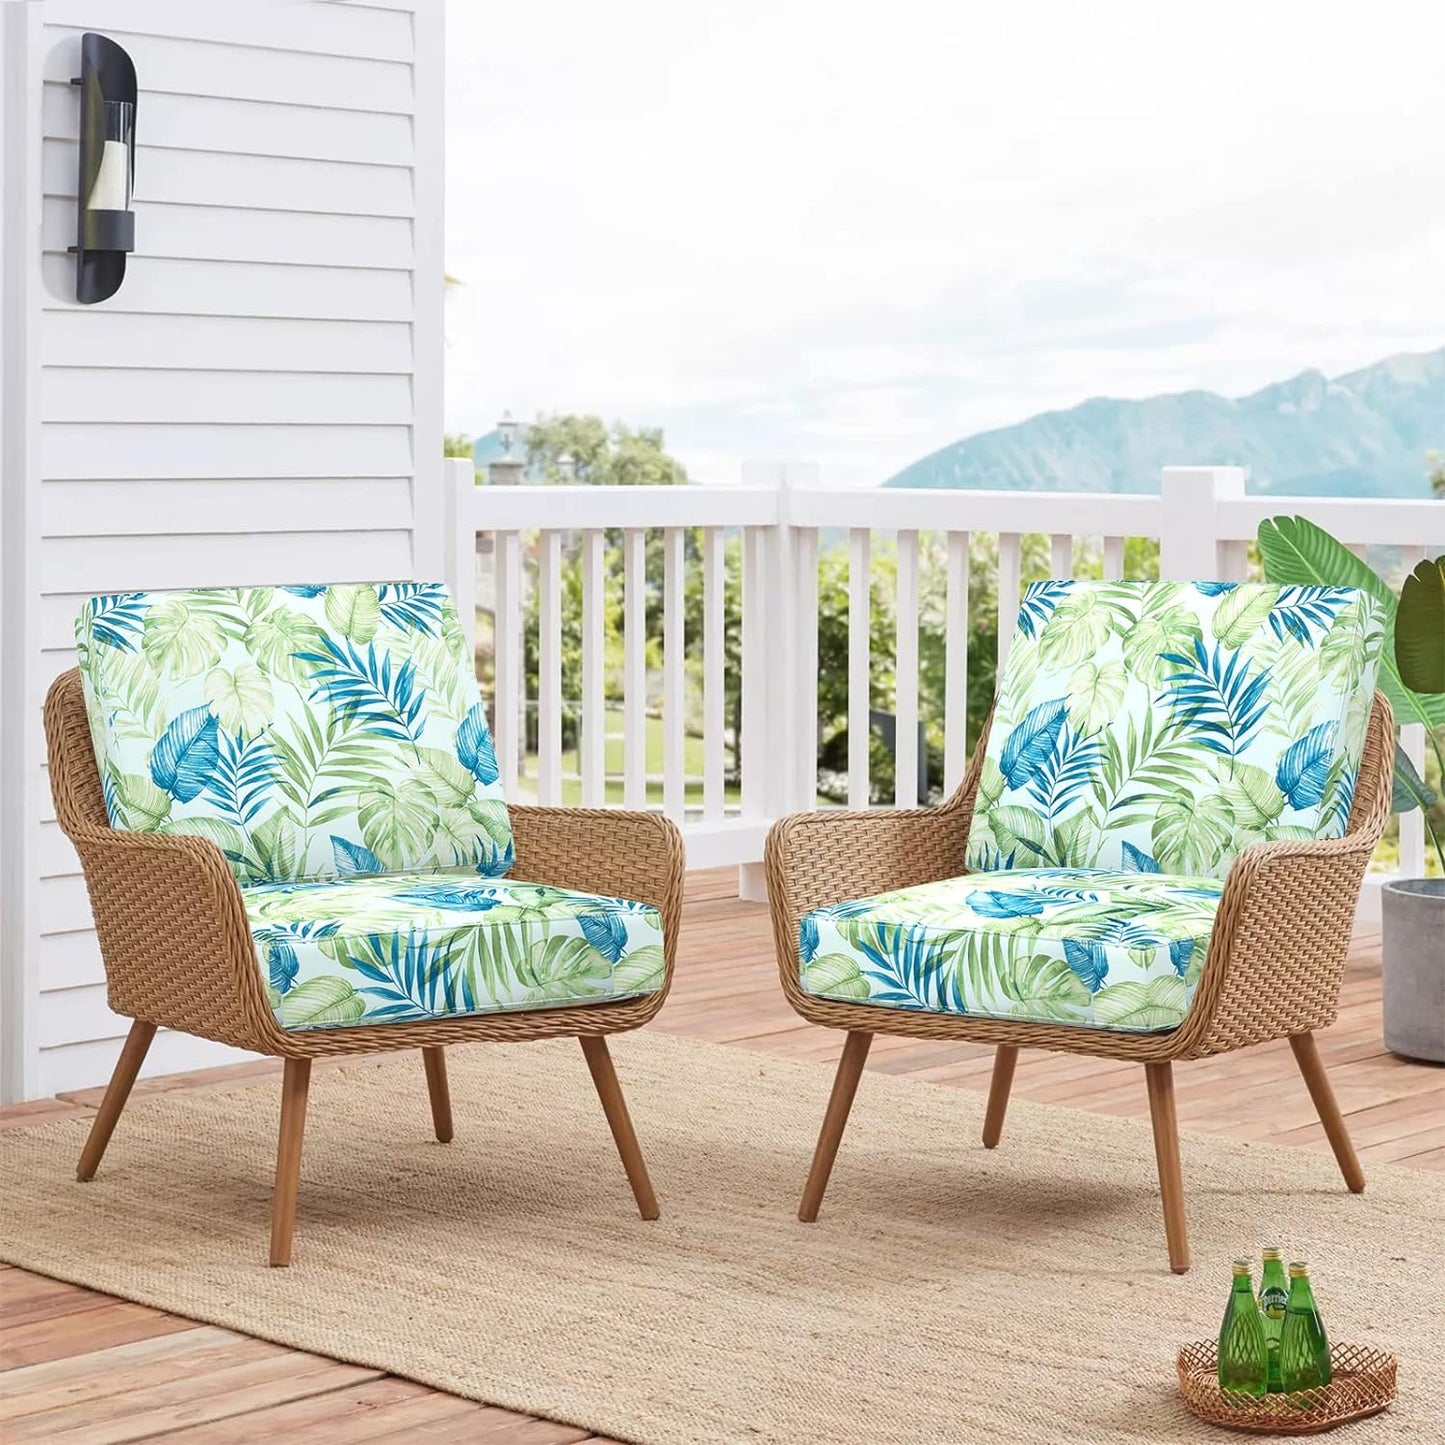 Sunlit Outdoor Cushion Covers, Replacement Cover Only, 4 Pack Water-Repellent Patio Chair Seat Slipcovers with Zipper and Tie, 20" x 18" x 4", Leaf, Blue Yellow